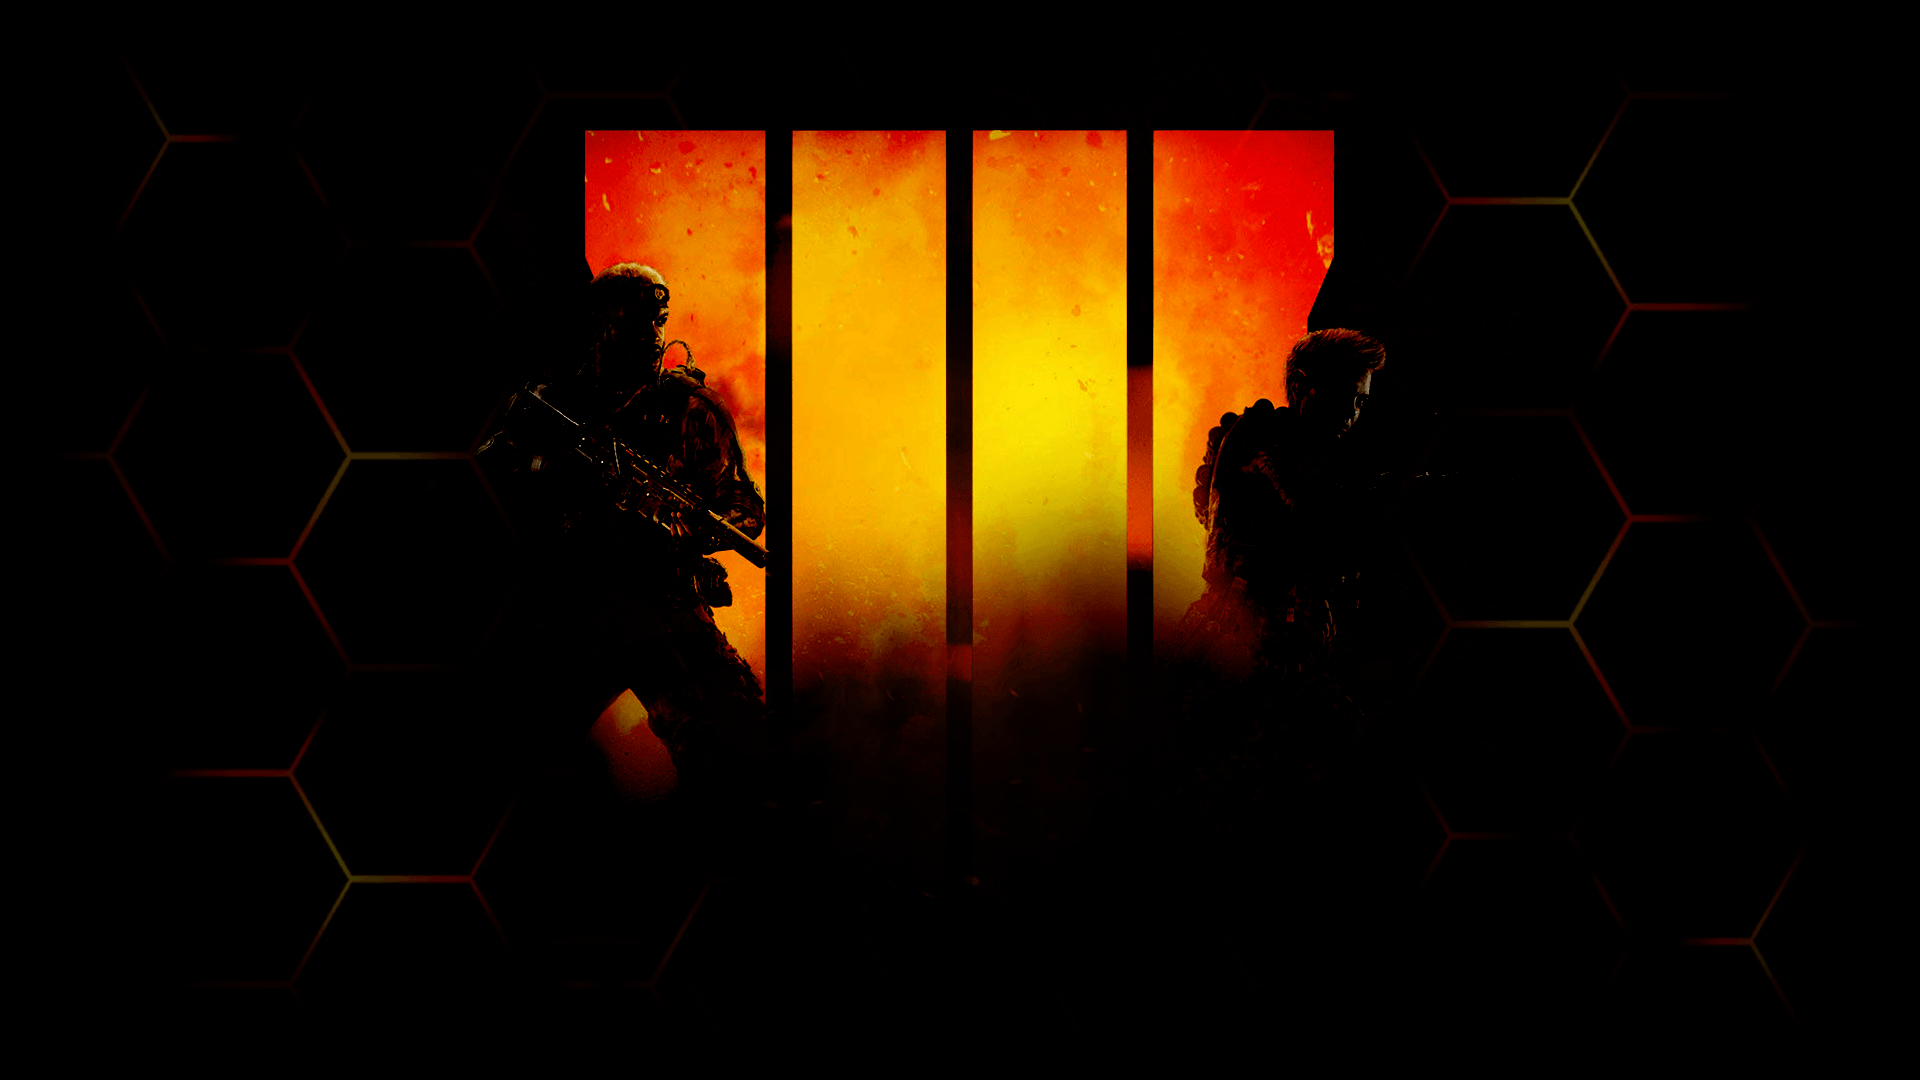 Some simple BO4 wallpaper I made